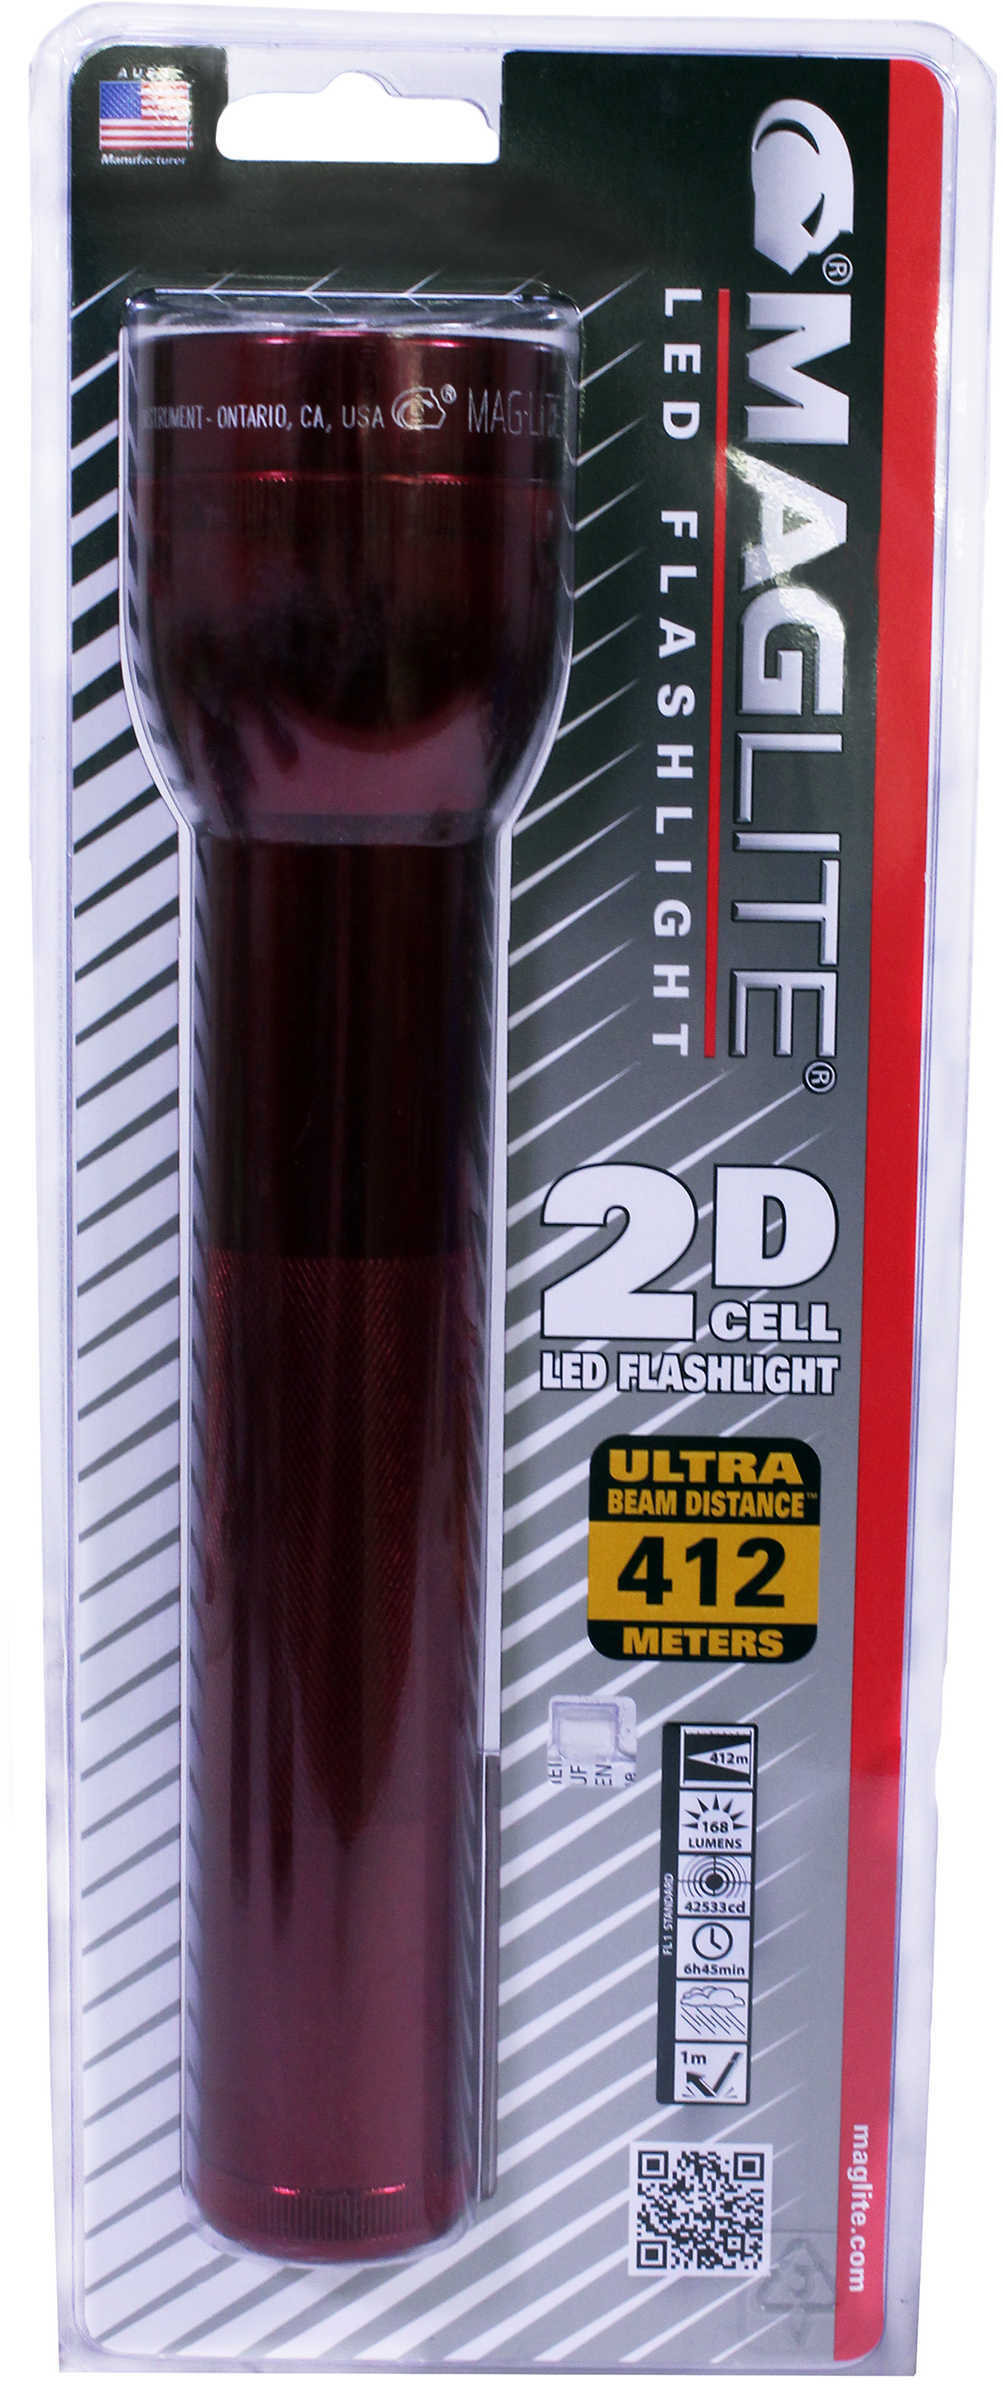 MagLite Flashlight, 2 D LED, Red - New In Package